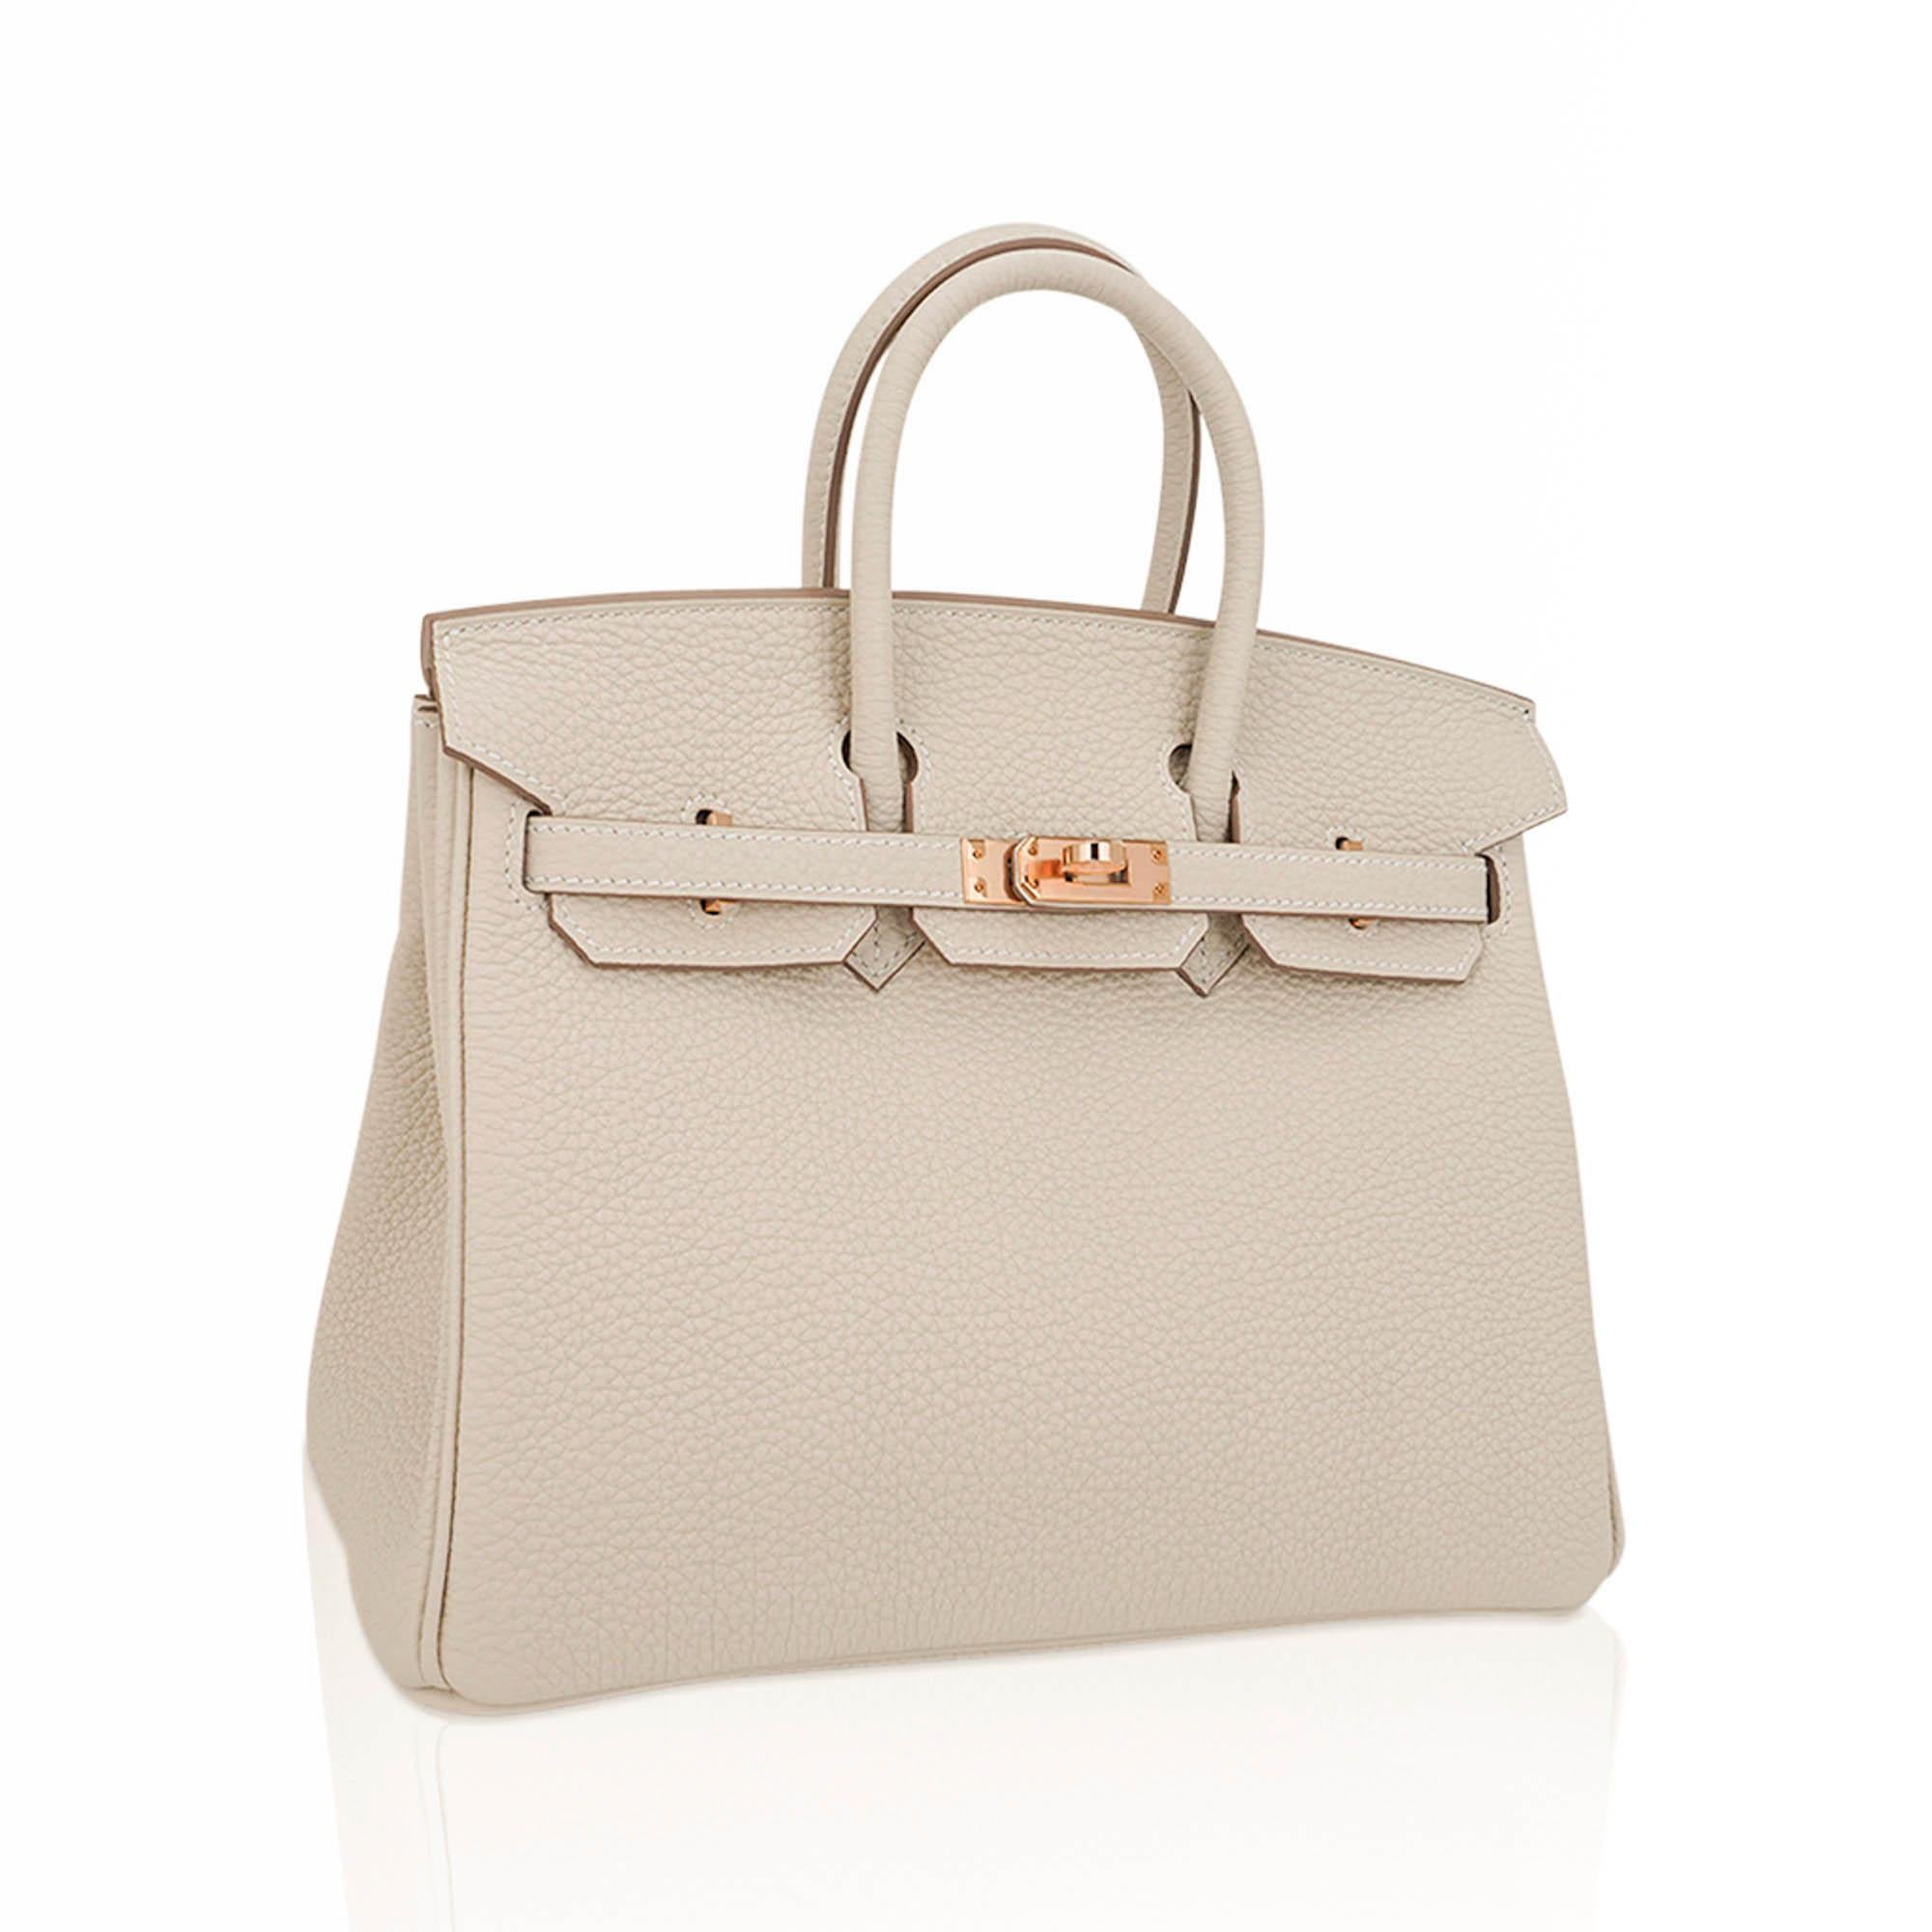 Mightychic offers an Hermes Birkin 25 bag featured in Craie.
This subtle neutral colour is perfect for year round wear.
Accentuated with coveted Rose Gold hardware.
Comes with the lock and keys in the clochette, signature Hermes box, sleeper and